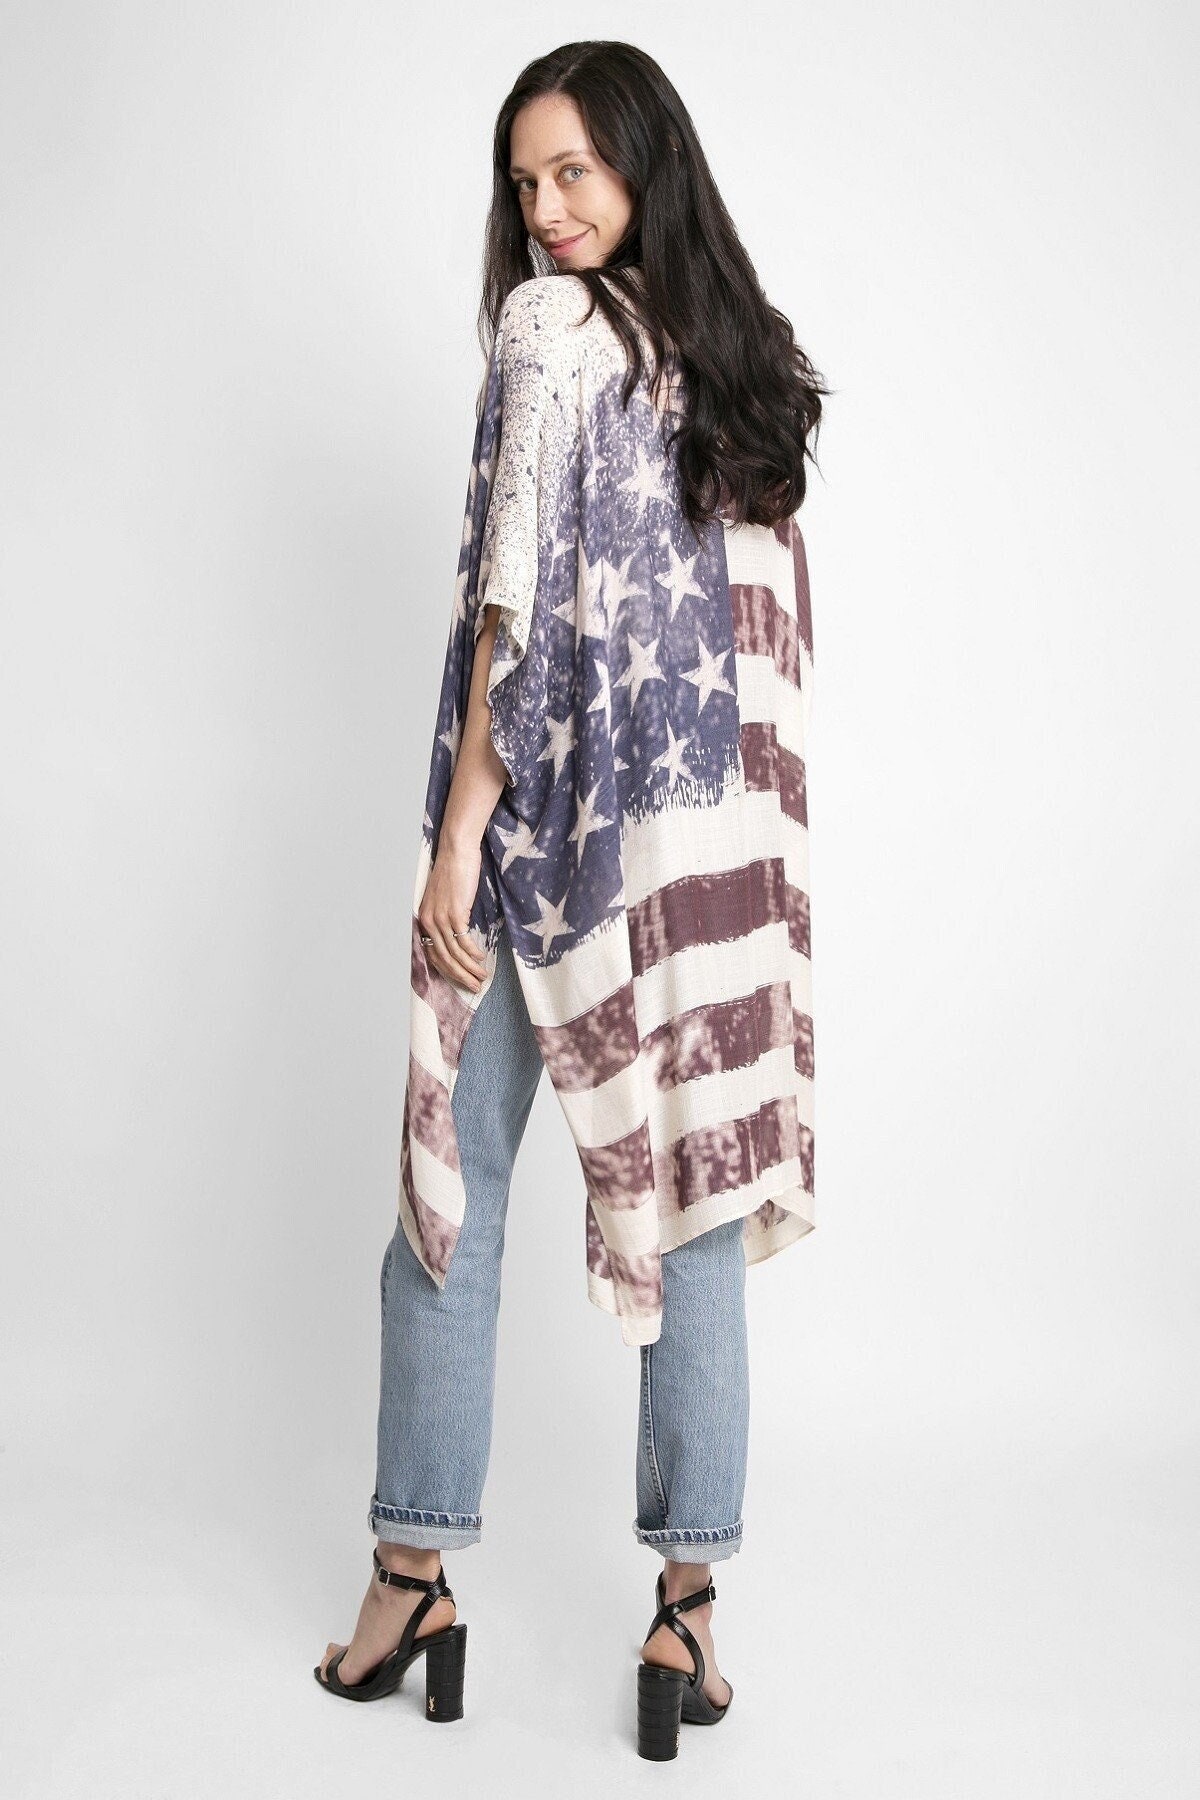 Independence kimono one size fit all July 4th stars stripes